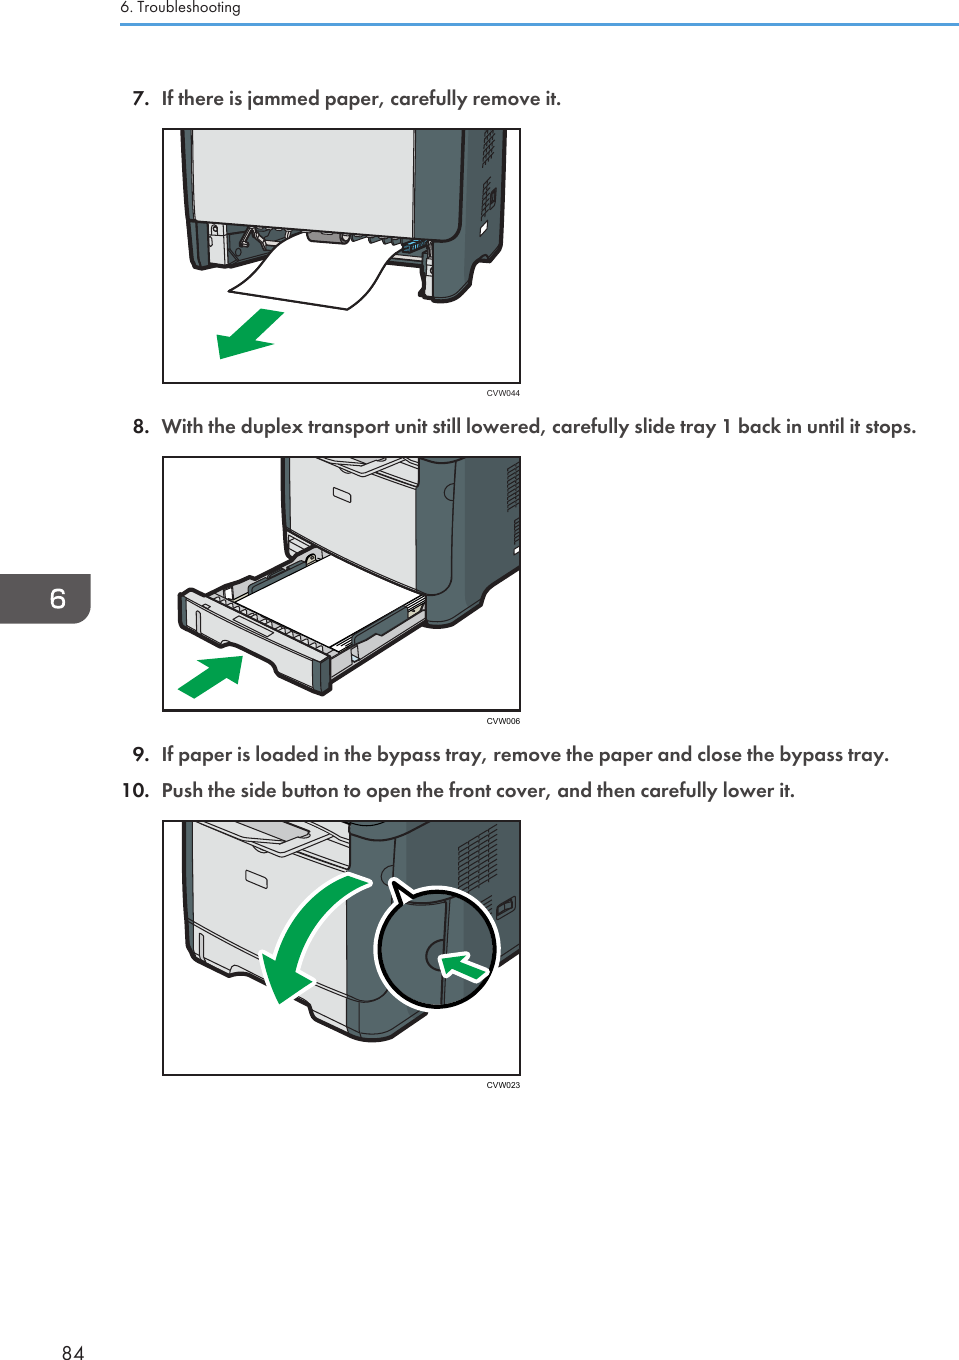 7. If there is jammed paper, carefully remove it.CVW0448. With the duplex transport unit still lowered, carefully slide tray 1 back in until it stops.CVW0069. If paper is loaded in the bypass tray, remove the paper and close the bypass tray.10. Push the side button to open the front cover, and then carefully lower it.CVW0236. Troubleshooting84